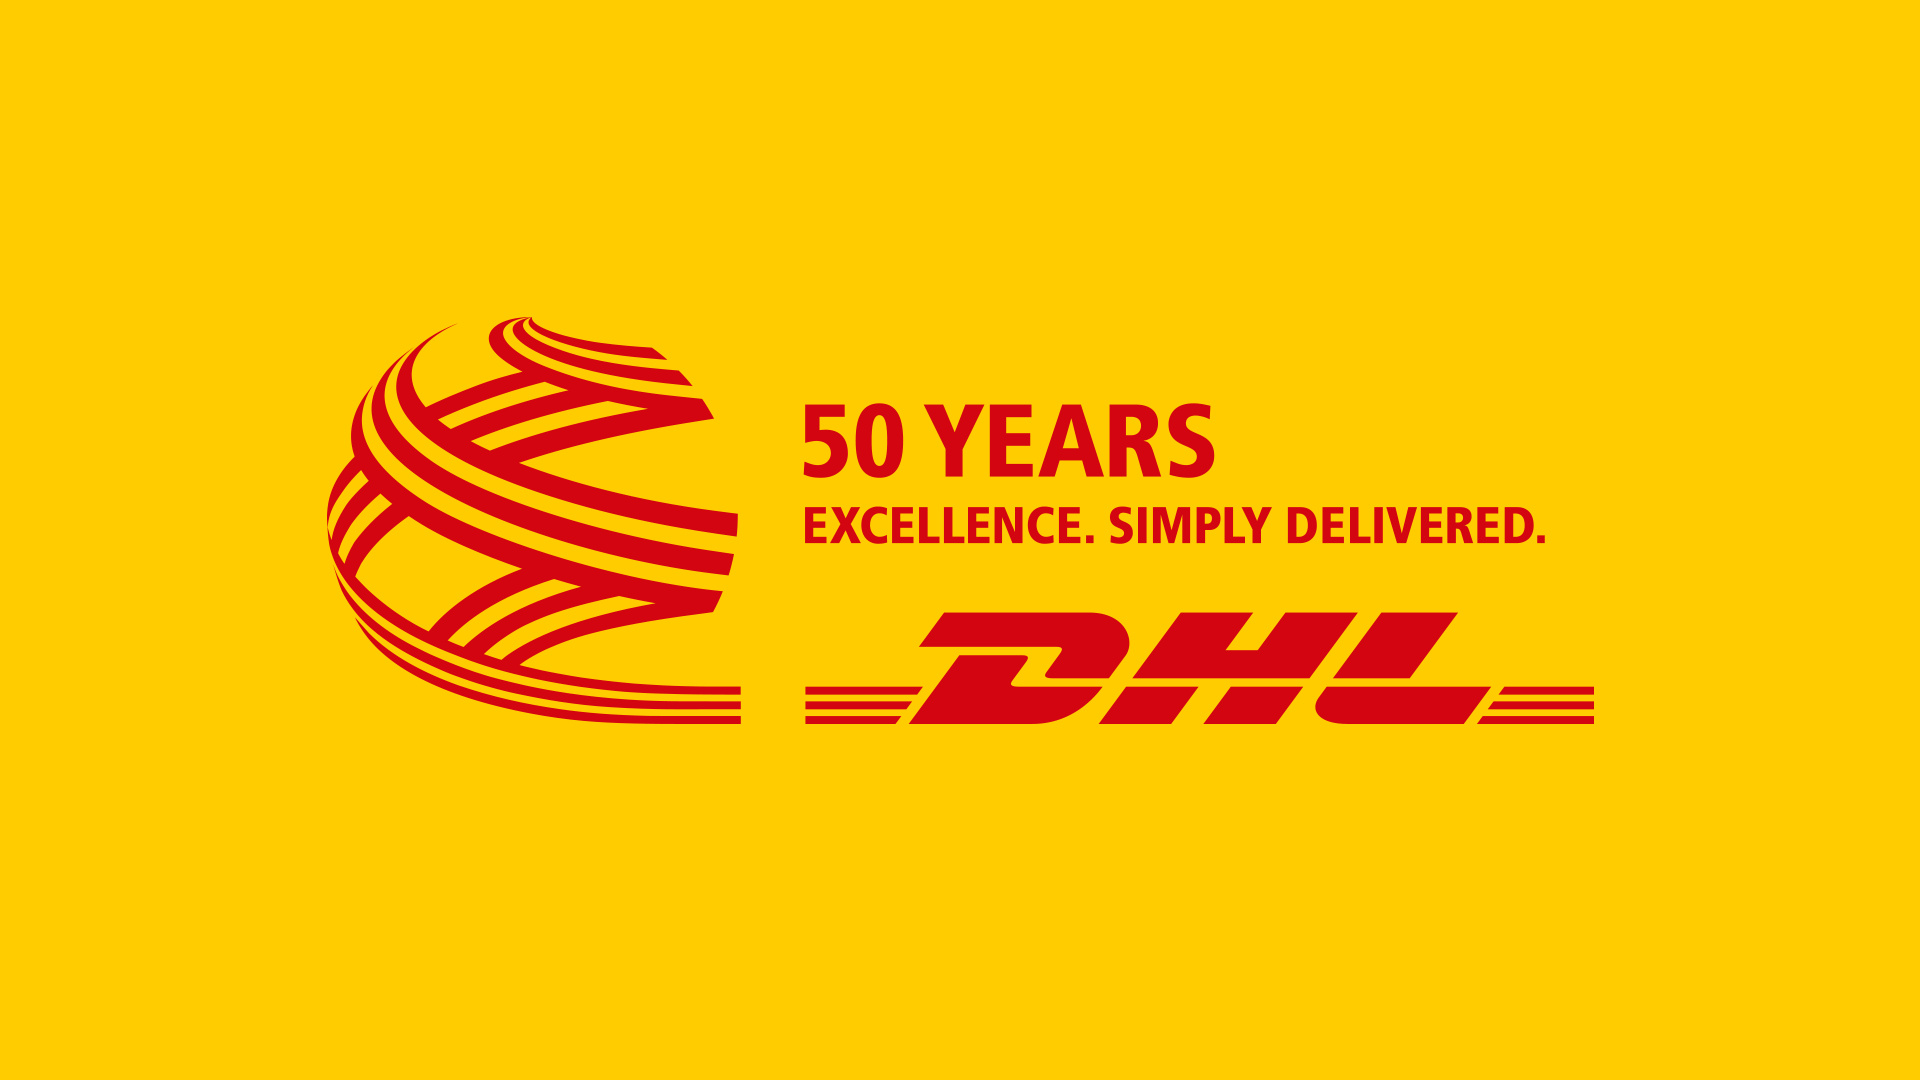 DHL: DHL's 50th anniversary, The world's leading logistics group. 1920x1080 Full HD Background.